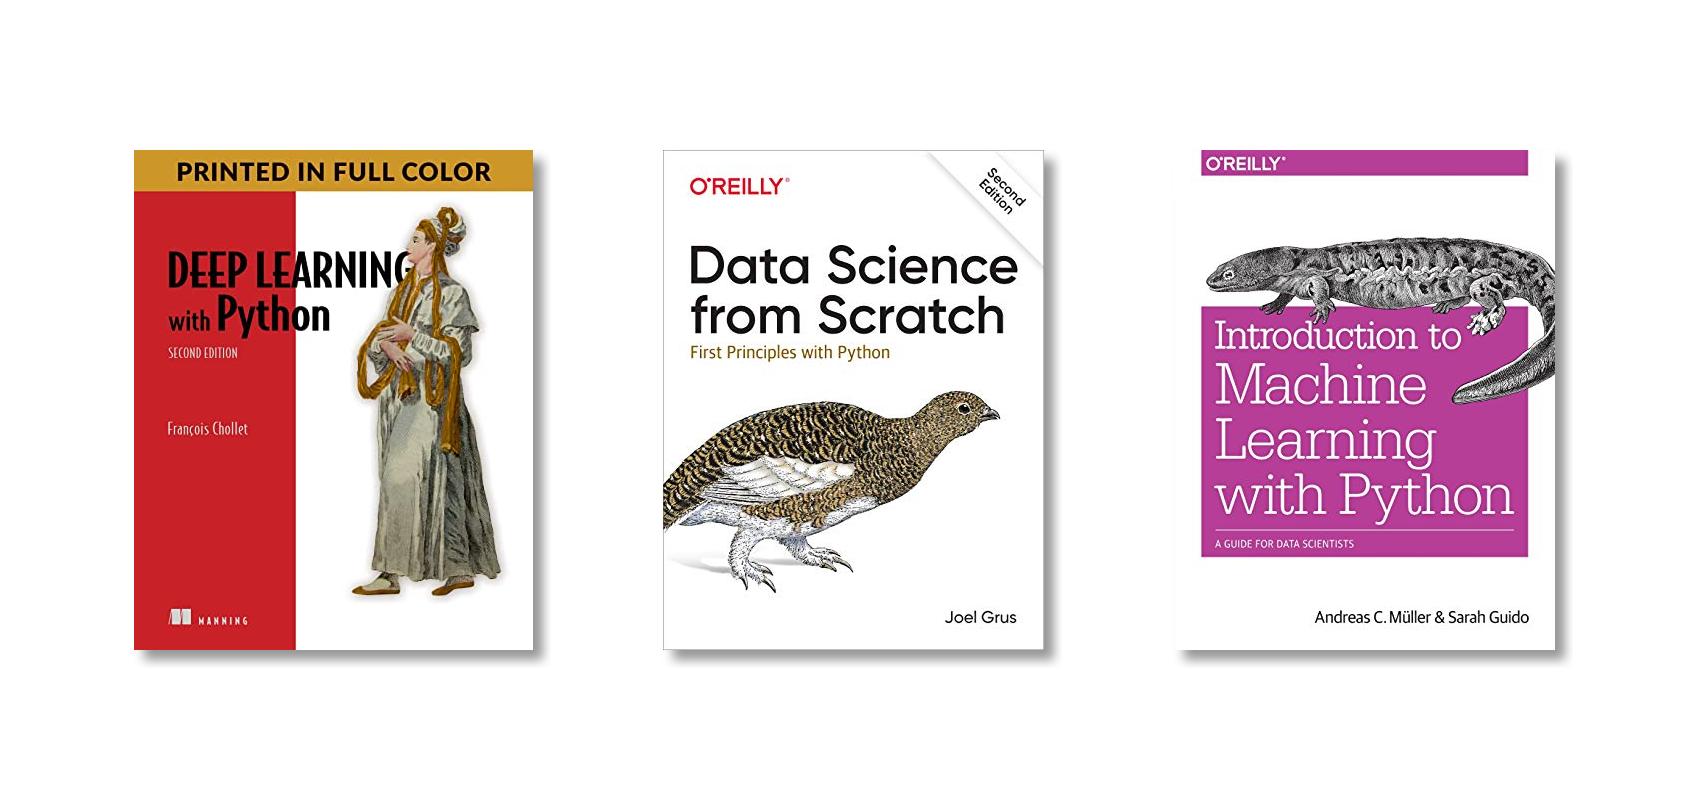 Python books on Machine Learning and AI - pythonbooks.org